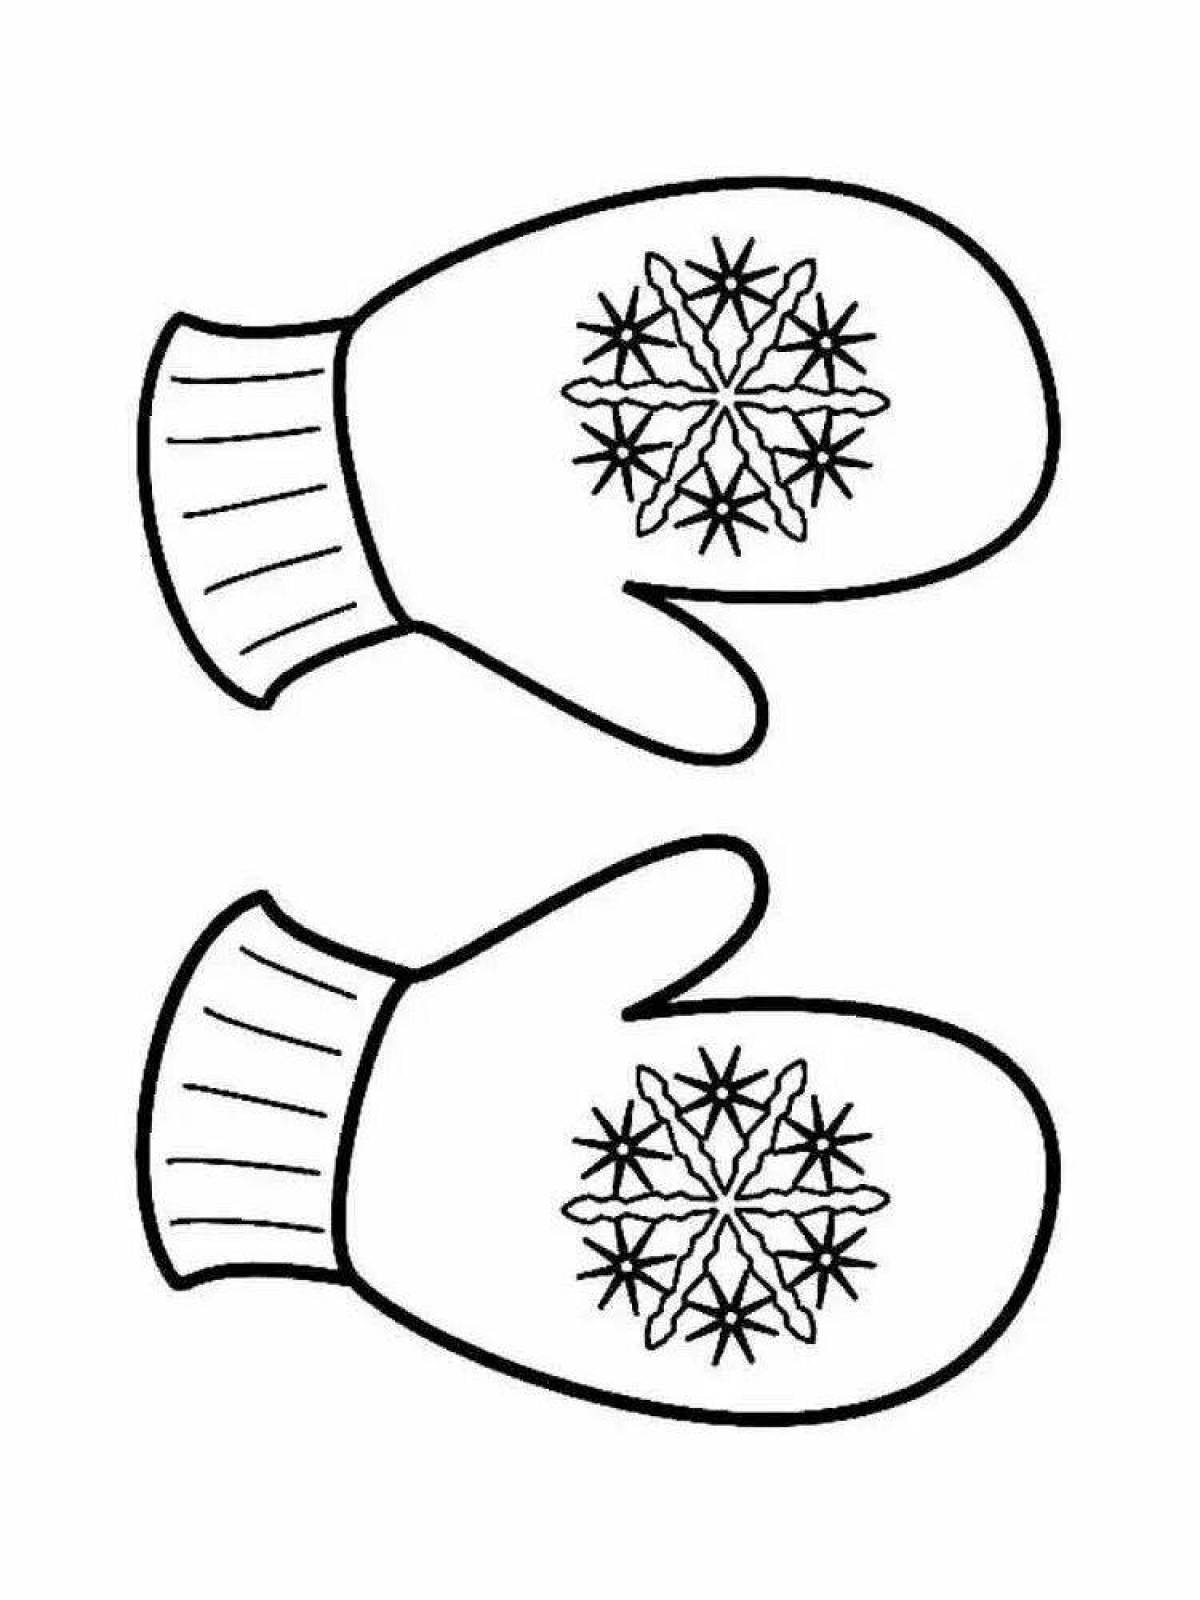 Fun coloring book with mitten pattern